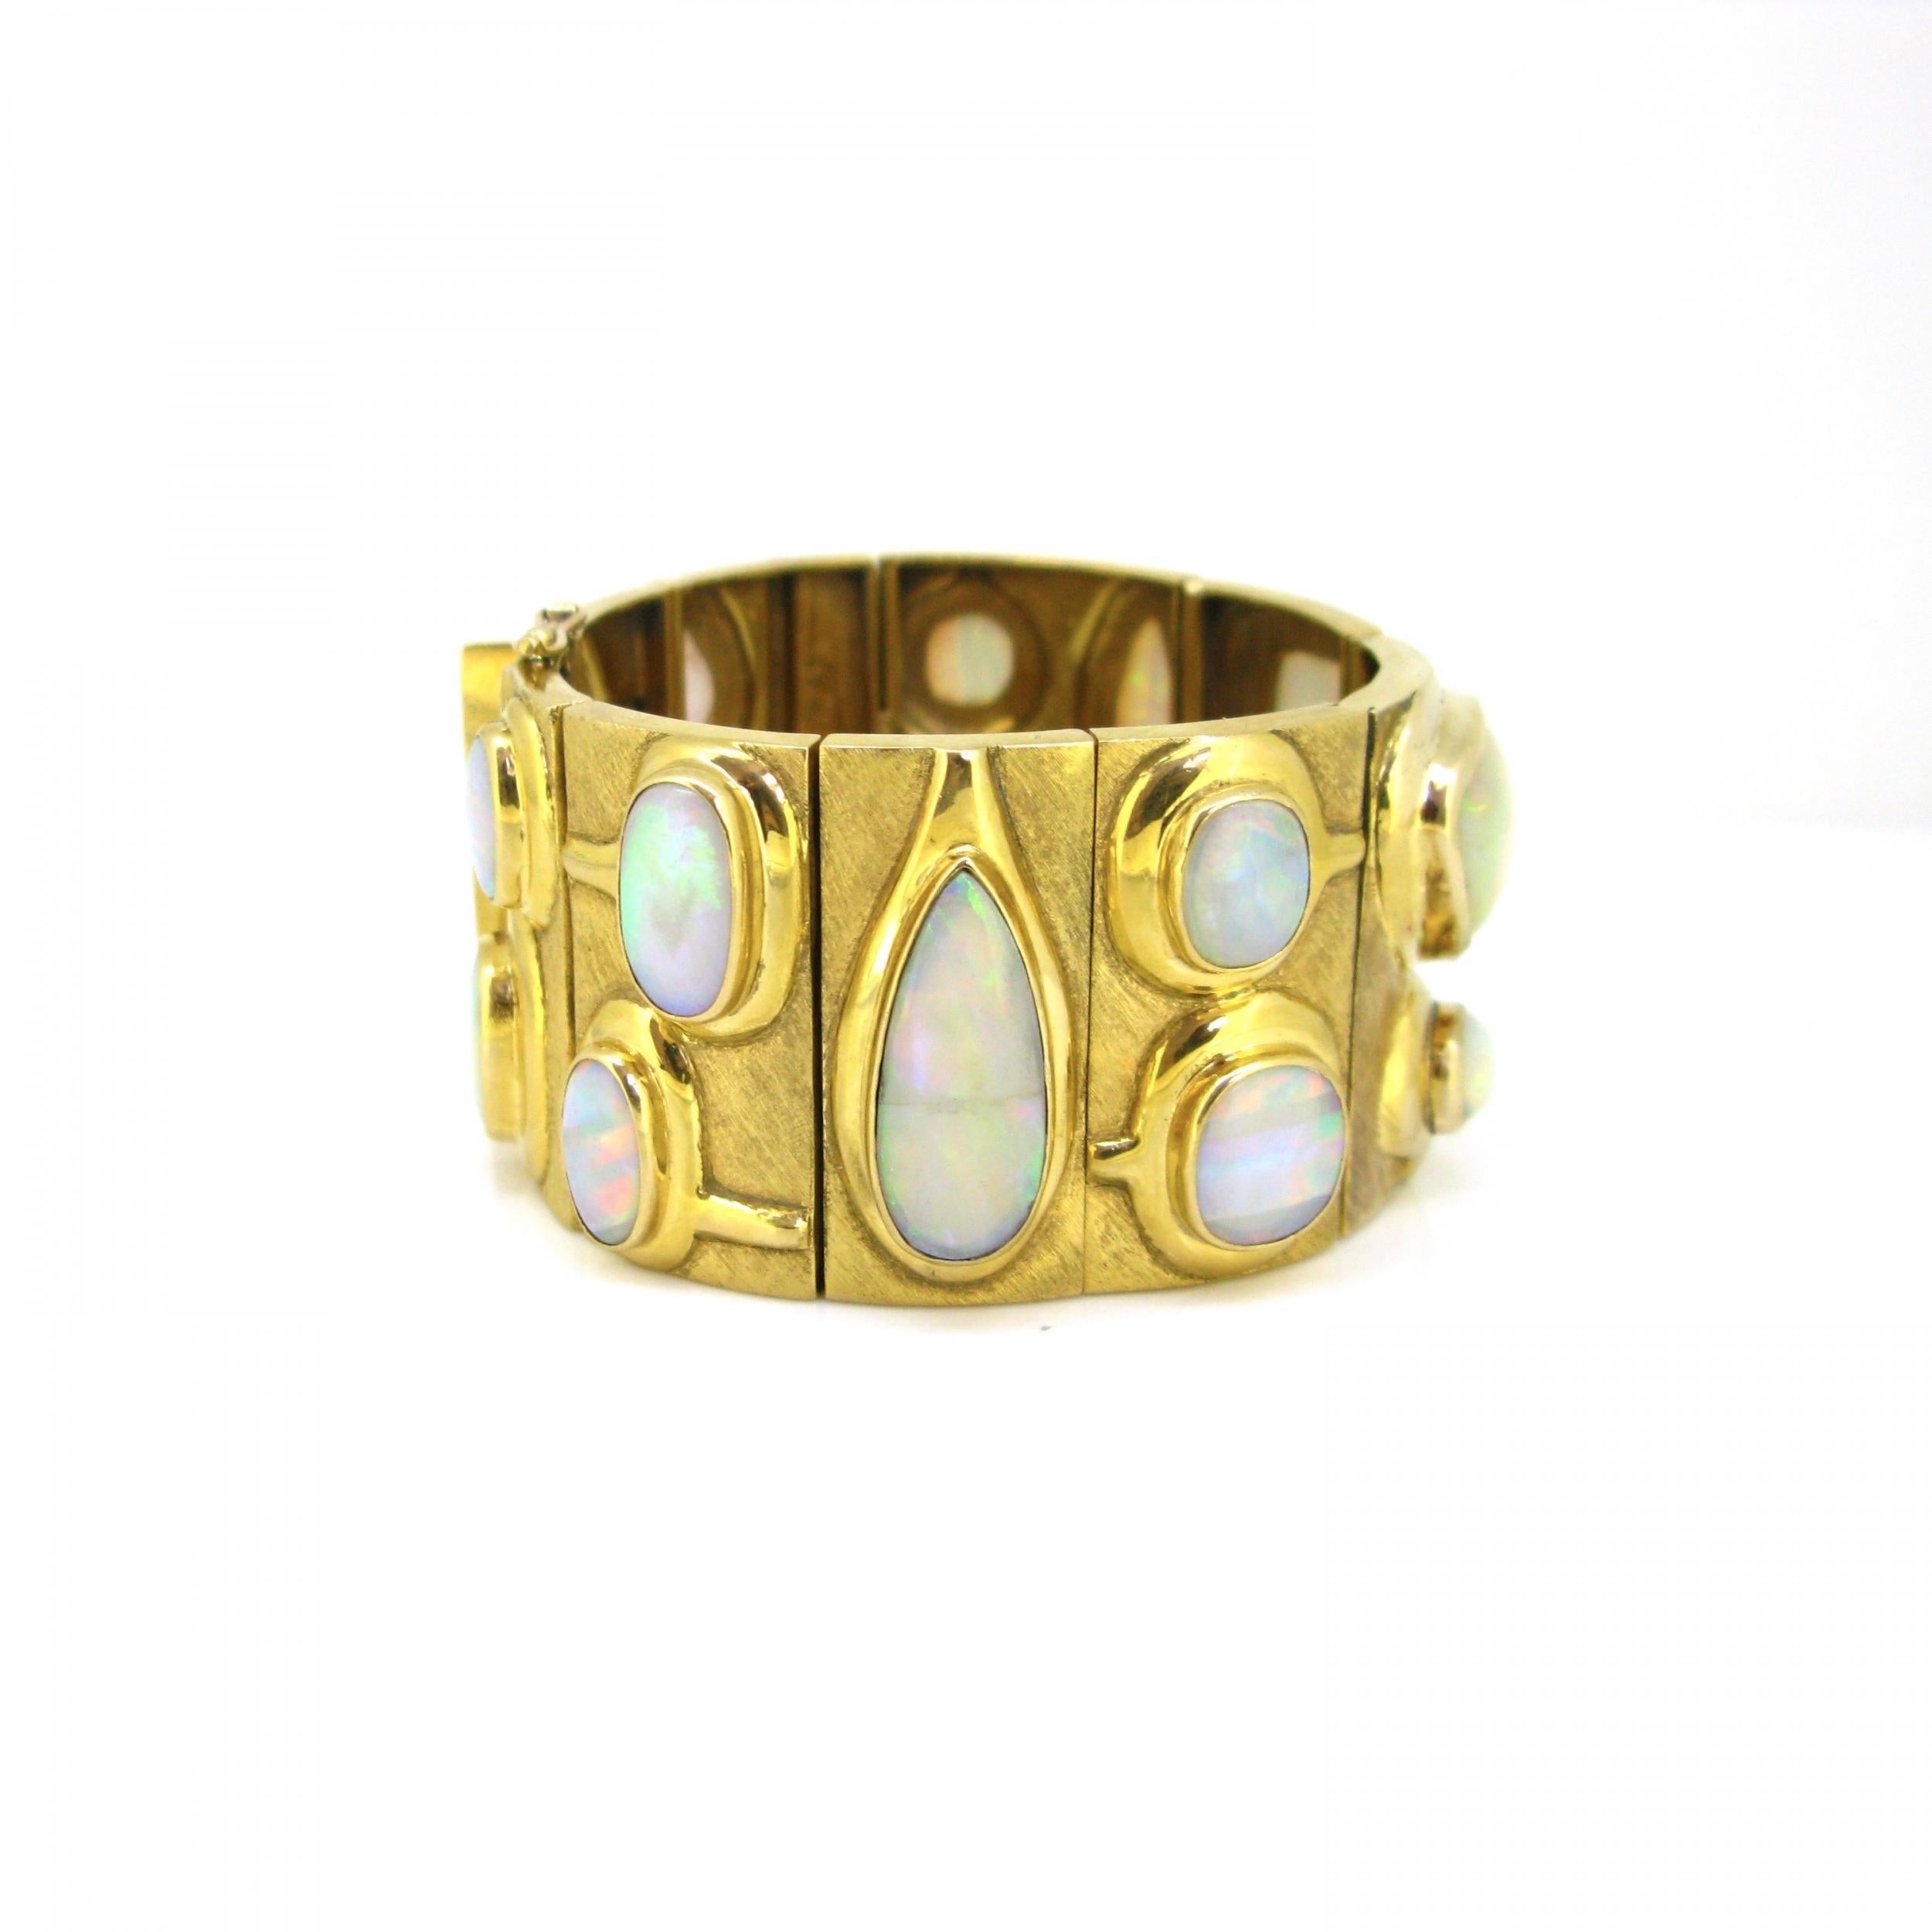 Weight:	116gr


Metal:	18kt yellow gold

	
Condition:	Very Good


Stones:	17 White Opals
•	Total carat weight:	55ct approximately

Signature:	Burle Marx


Comments: 	This important bracelet comprises 9 plaques of 18kt brushed yellow gold (tested).